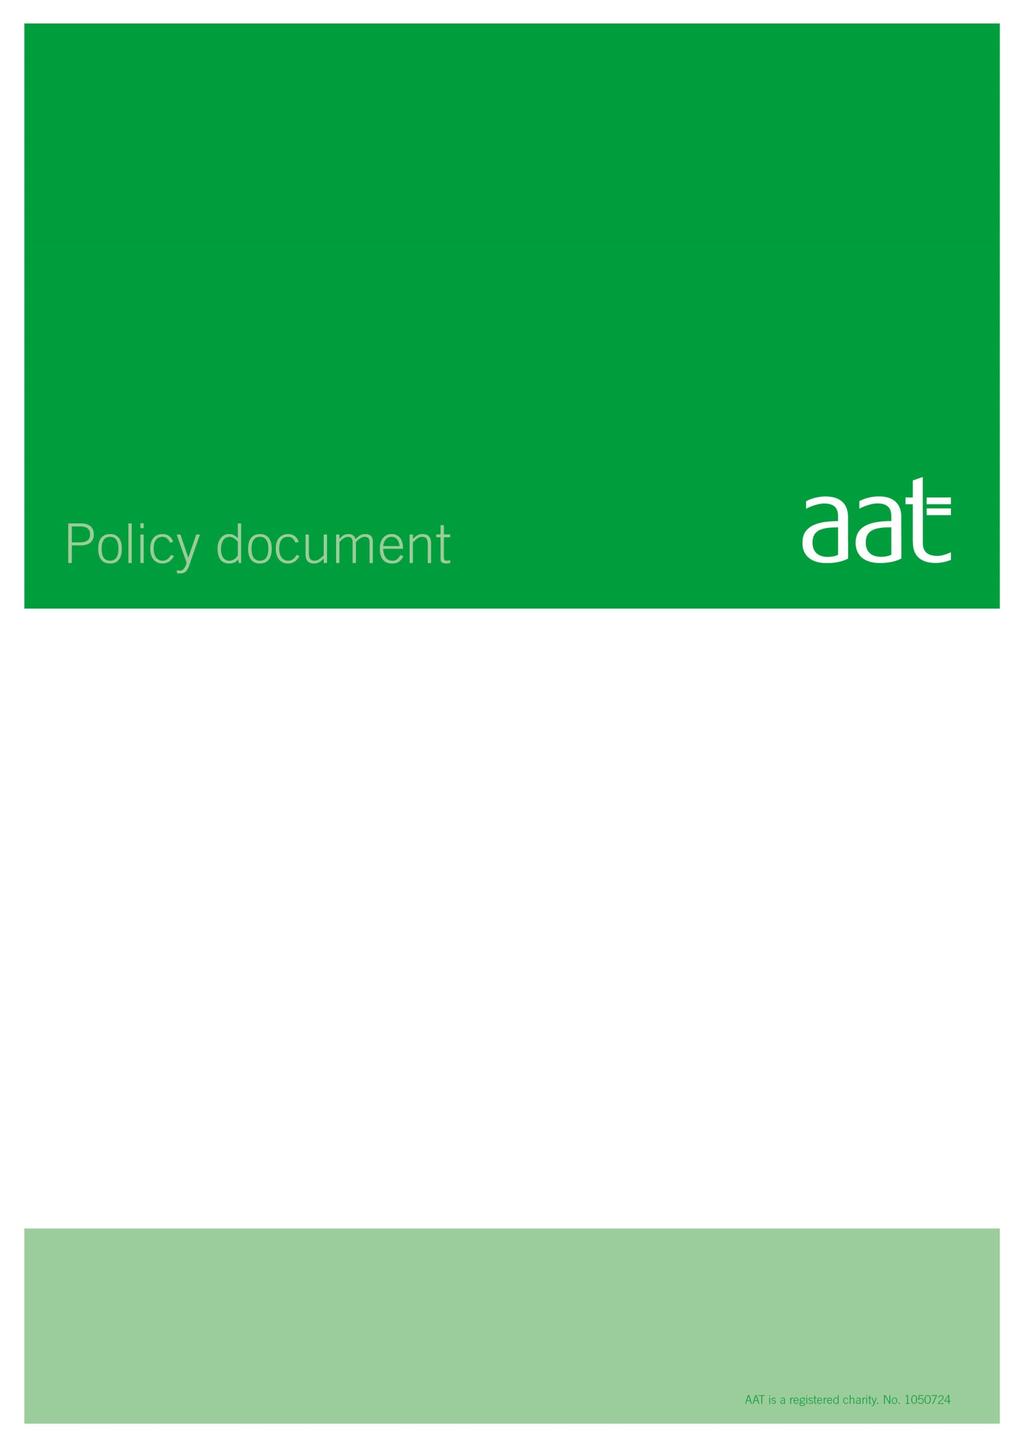 Insolvency AAT is a